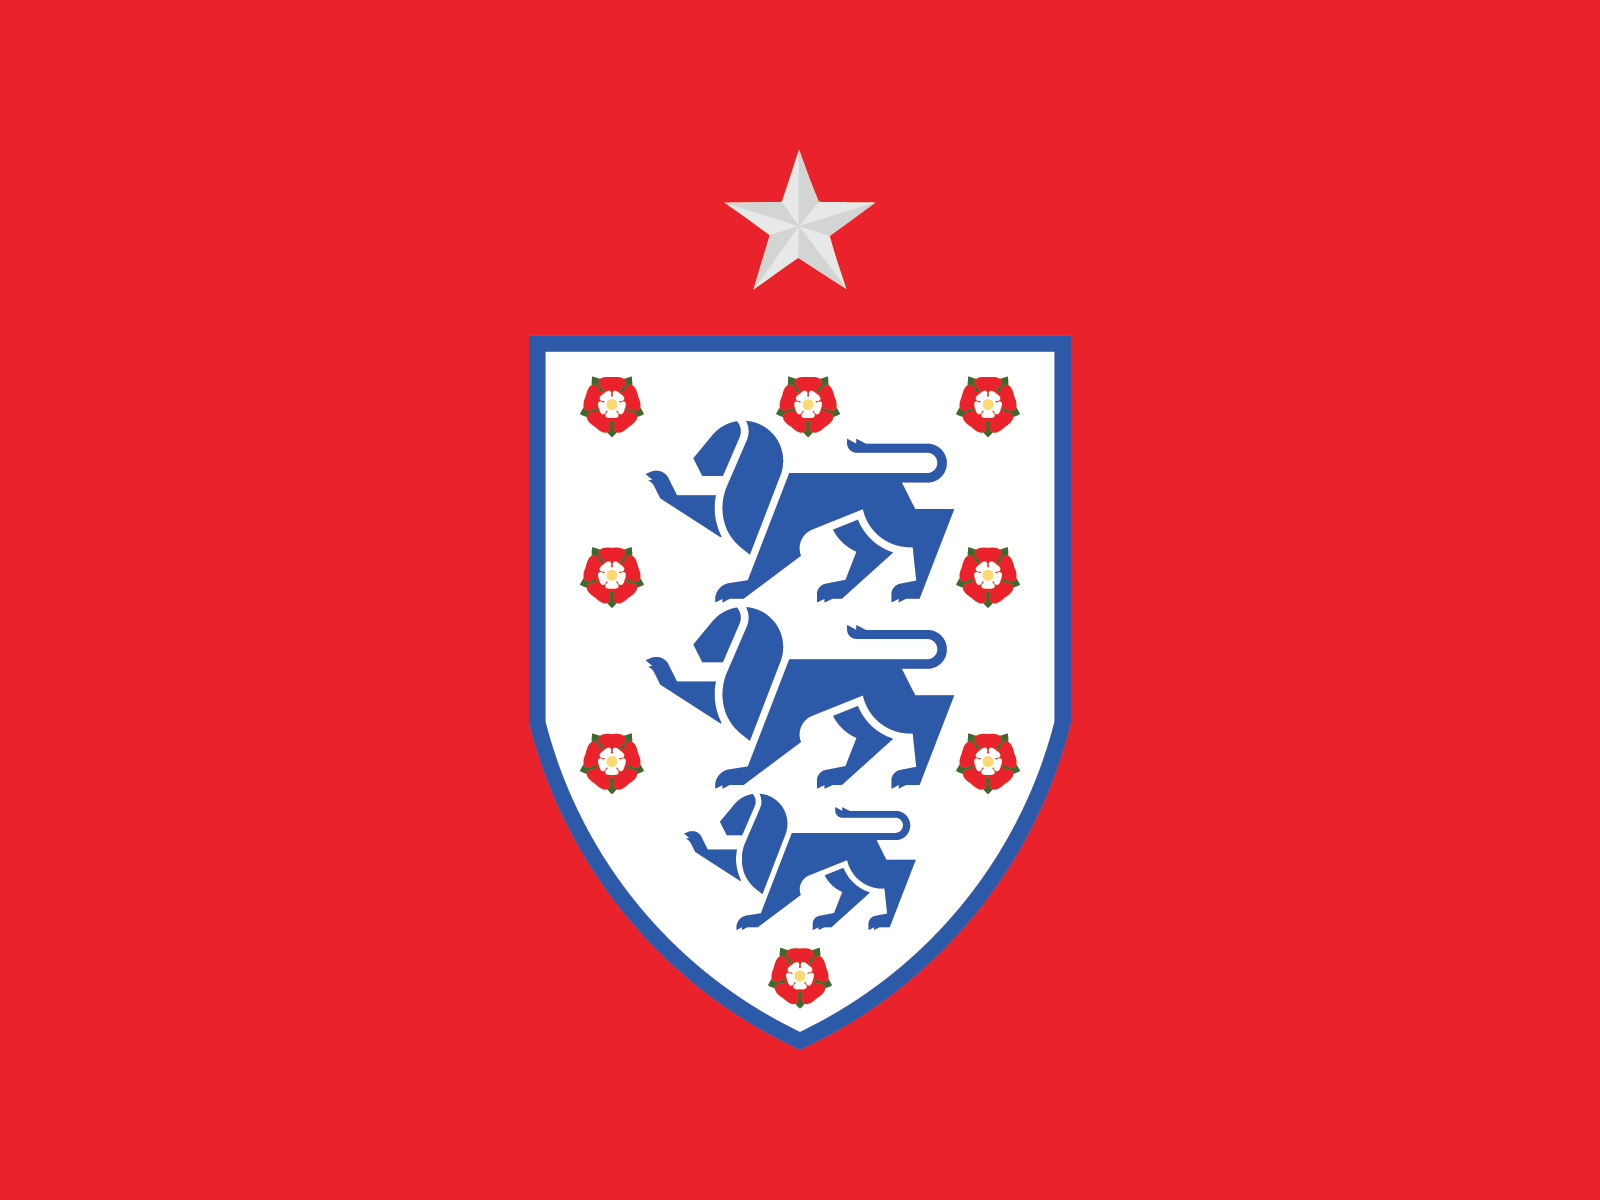 England Soccer Badge by Daniel Margheim on Dribbble